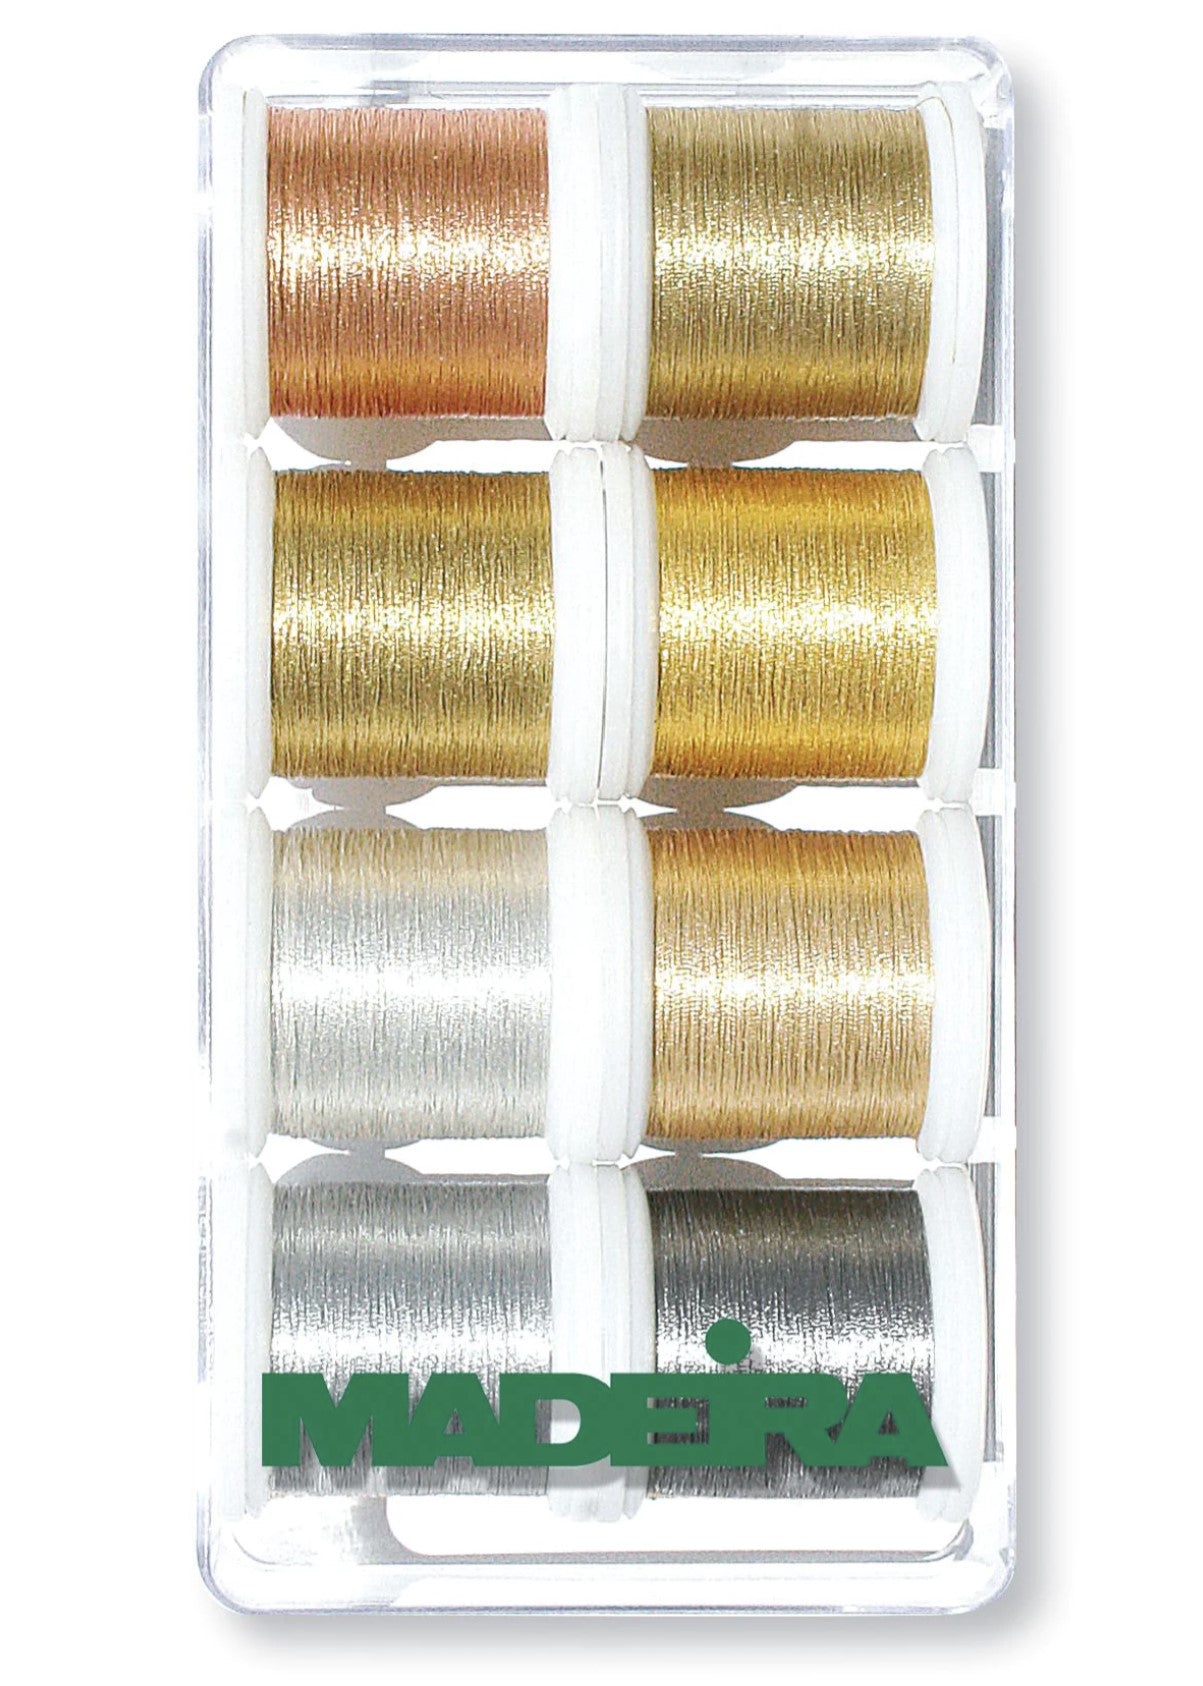 Assortment Metallic Heavy Metal  -- Machine Embroidery Threads -- Gift Box, 8 units (#30 Weight, Ref. MA8014) by MADEIRA®